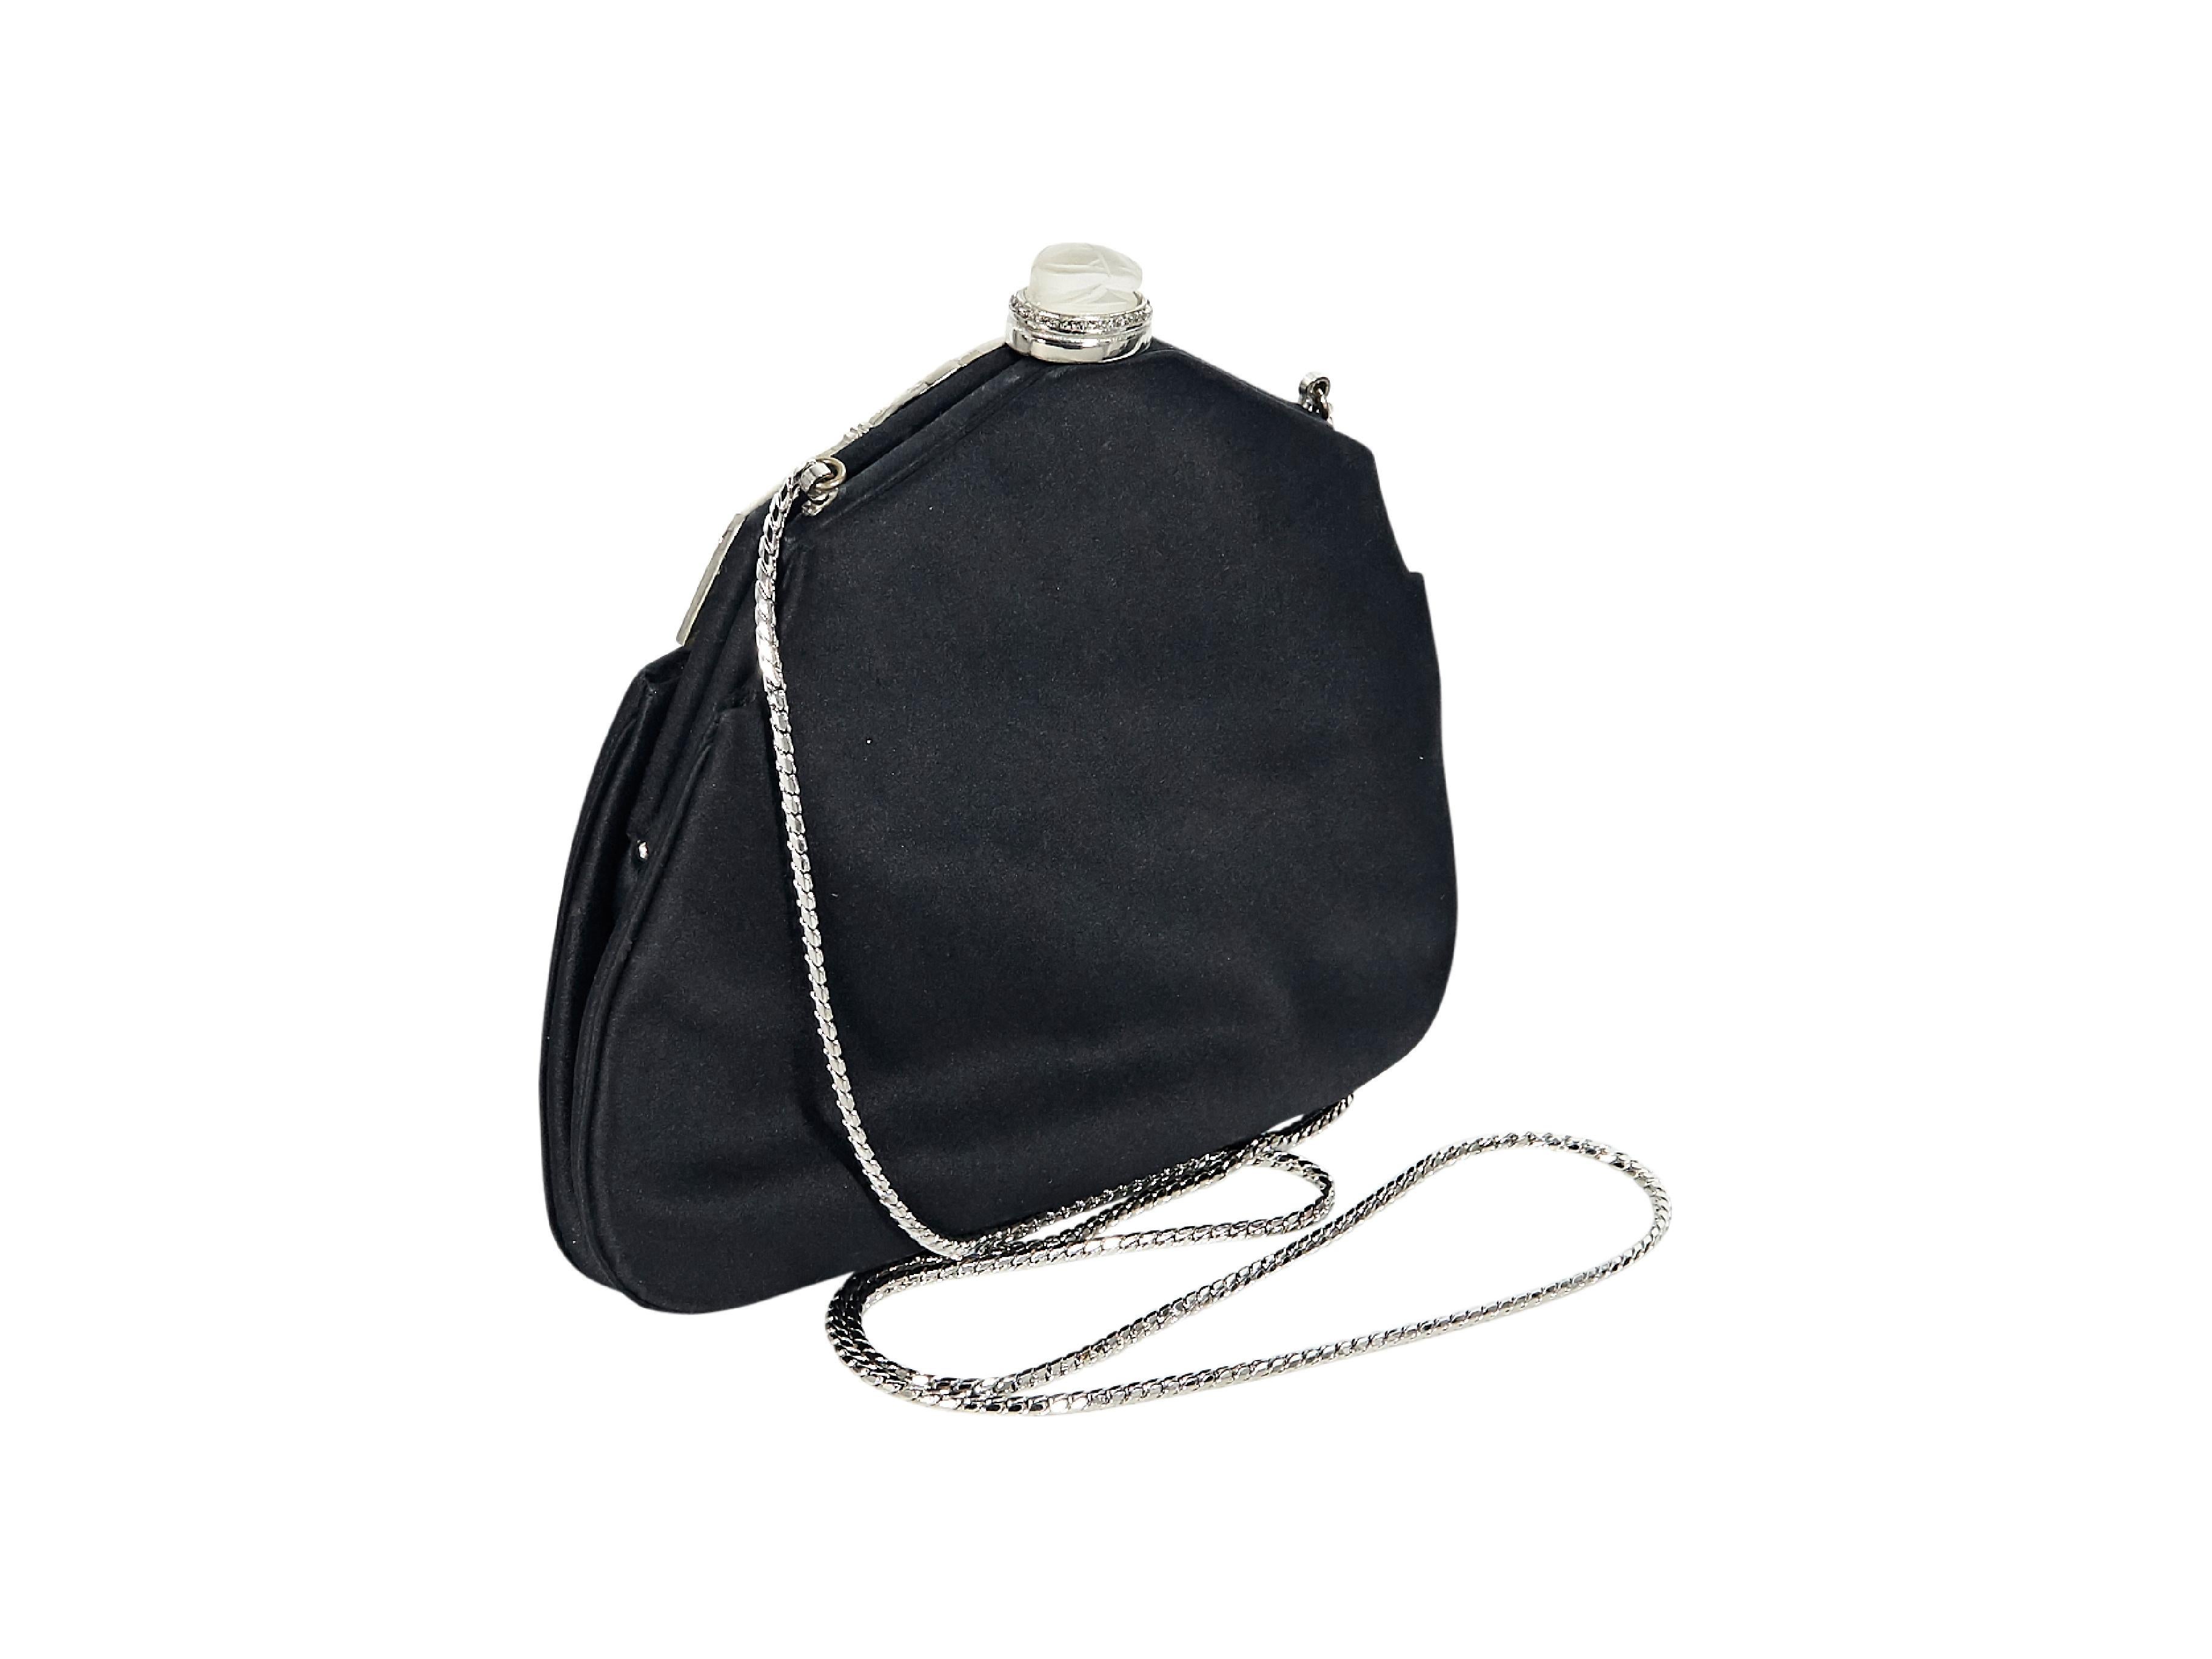 Product details:  Black satin evening bag by Judith Leiber.  Embellished with rhinestones.  Tuck-away shoulder strap.  Top push-clasp closure.  Silvertone hardware.  7